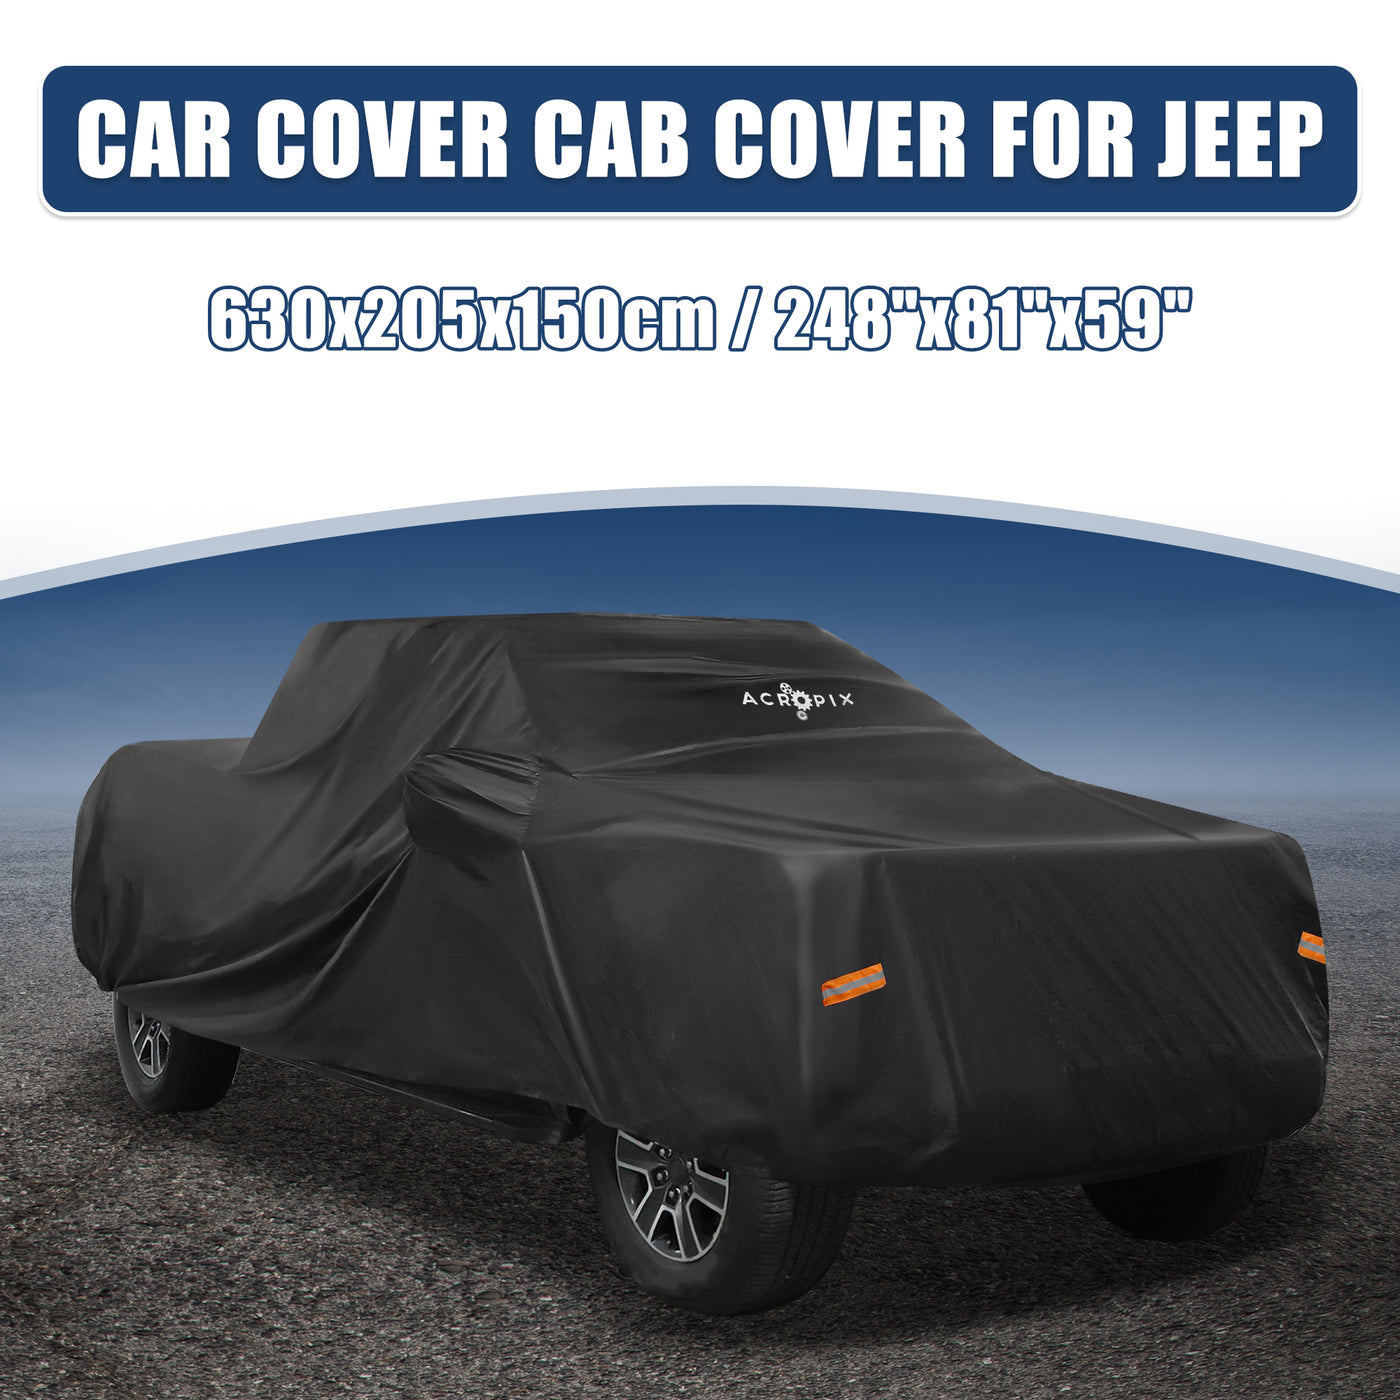 ACROPIX Pickup Truck Car Cover Fit for Ford F150 Crew Cab 6.5ft Bed Pickup 4 Door - Pack of 1 Black